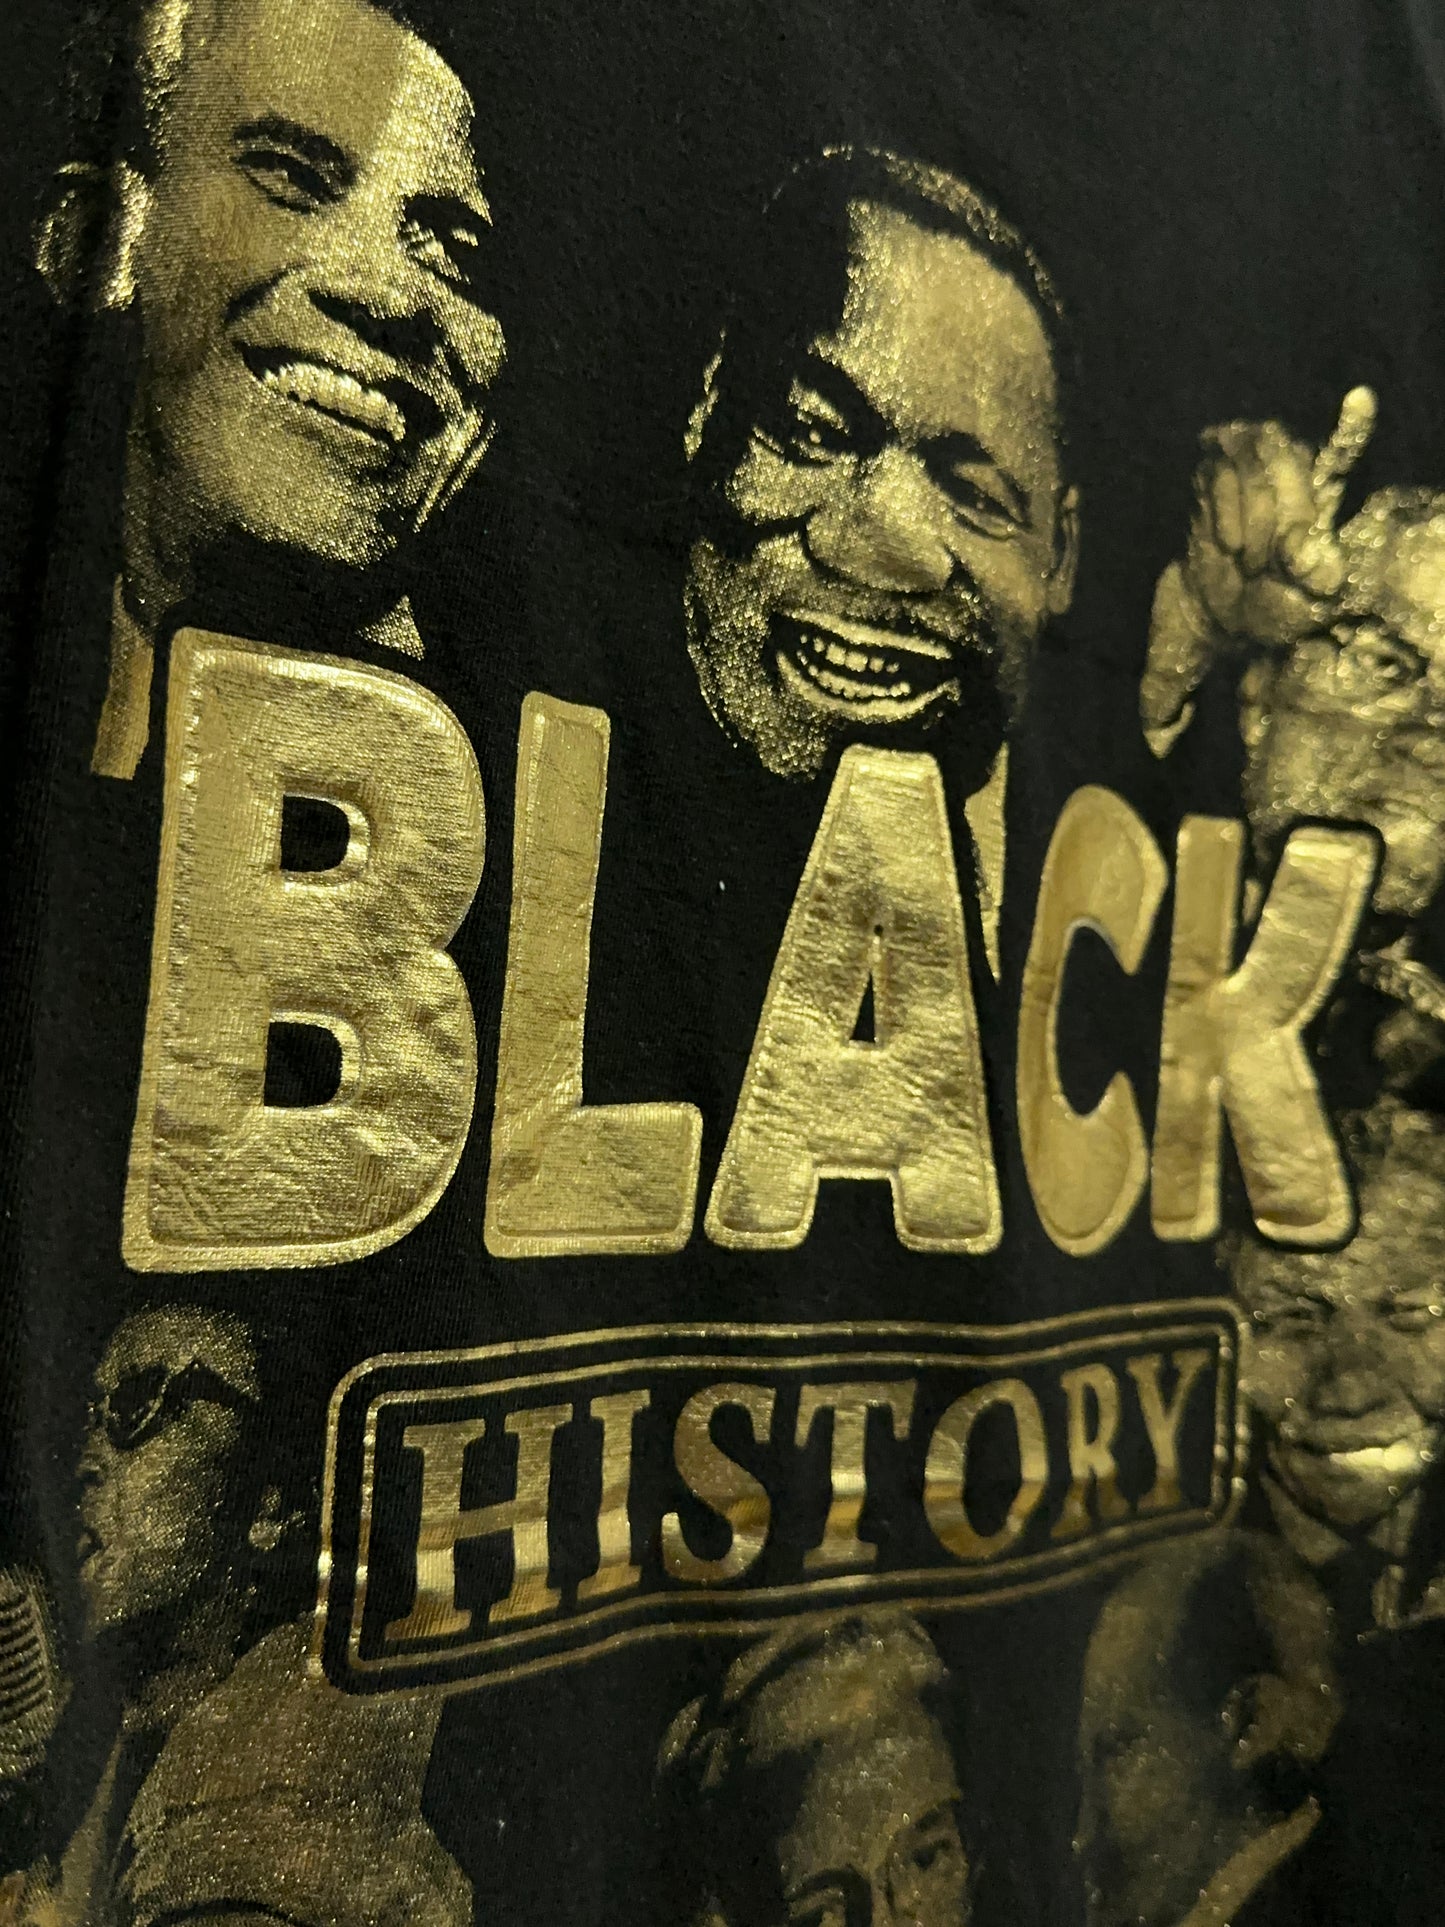 2000s Black History African American Culture Graphic Tee XXL